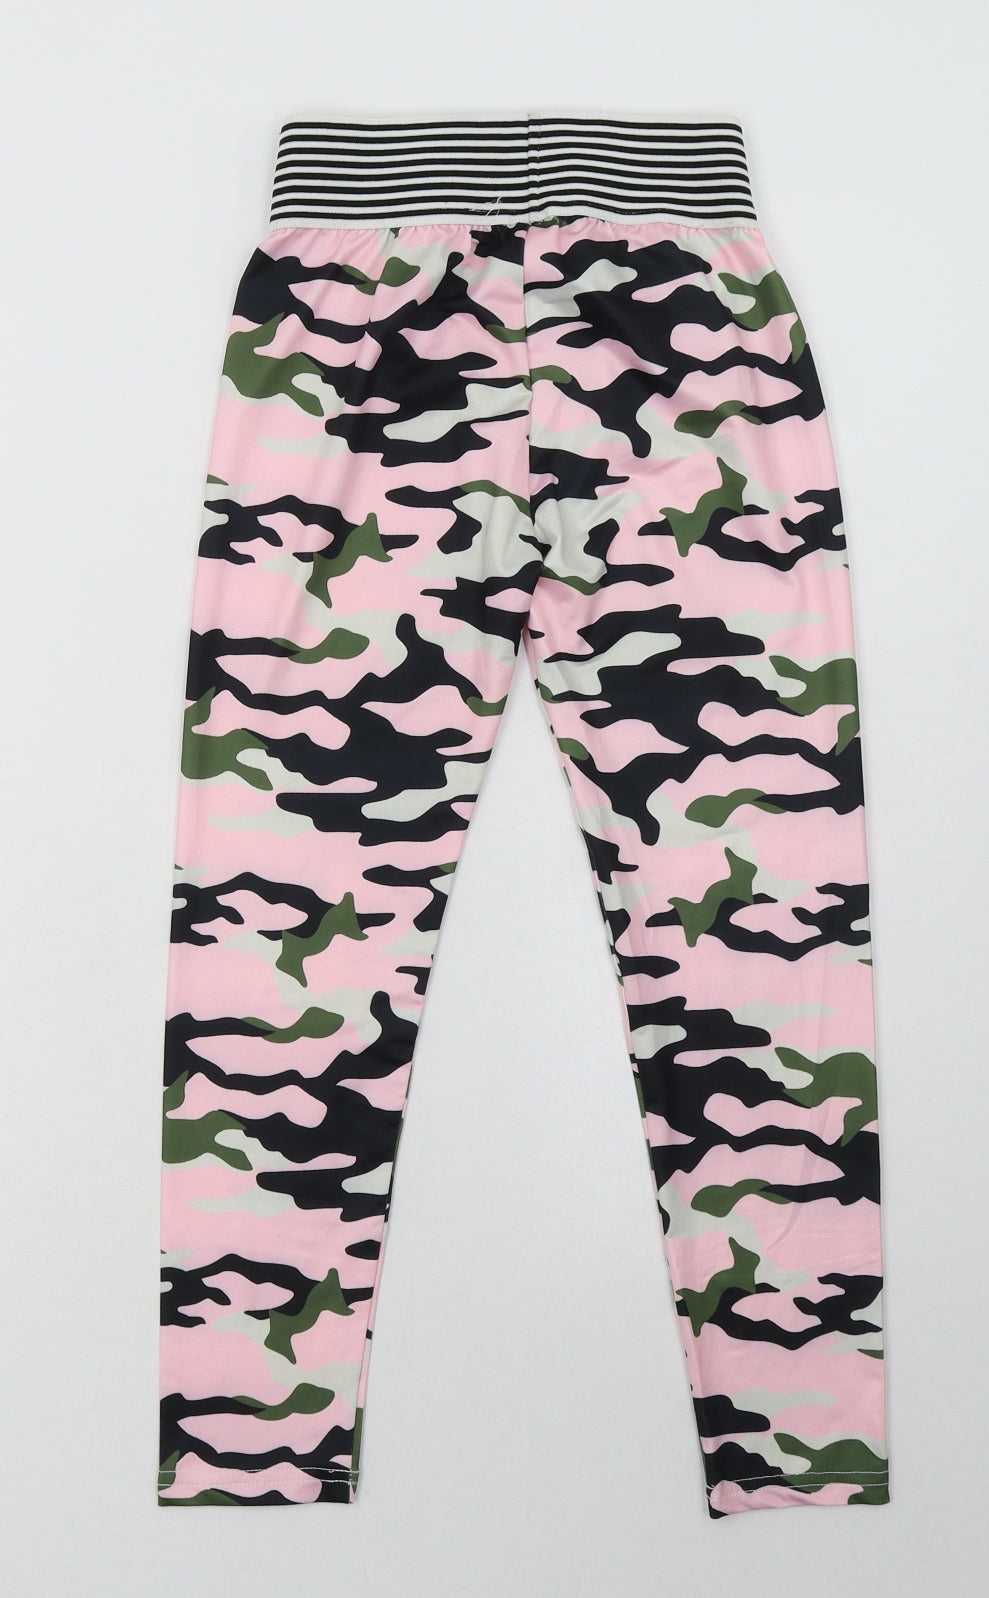 Military PINK Camouflage BDU Cargo Pants Army Fatigue Tactical Combat Camo  Pants | eBay